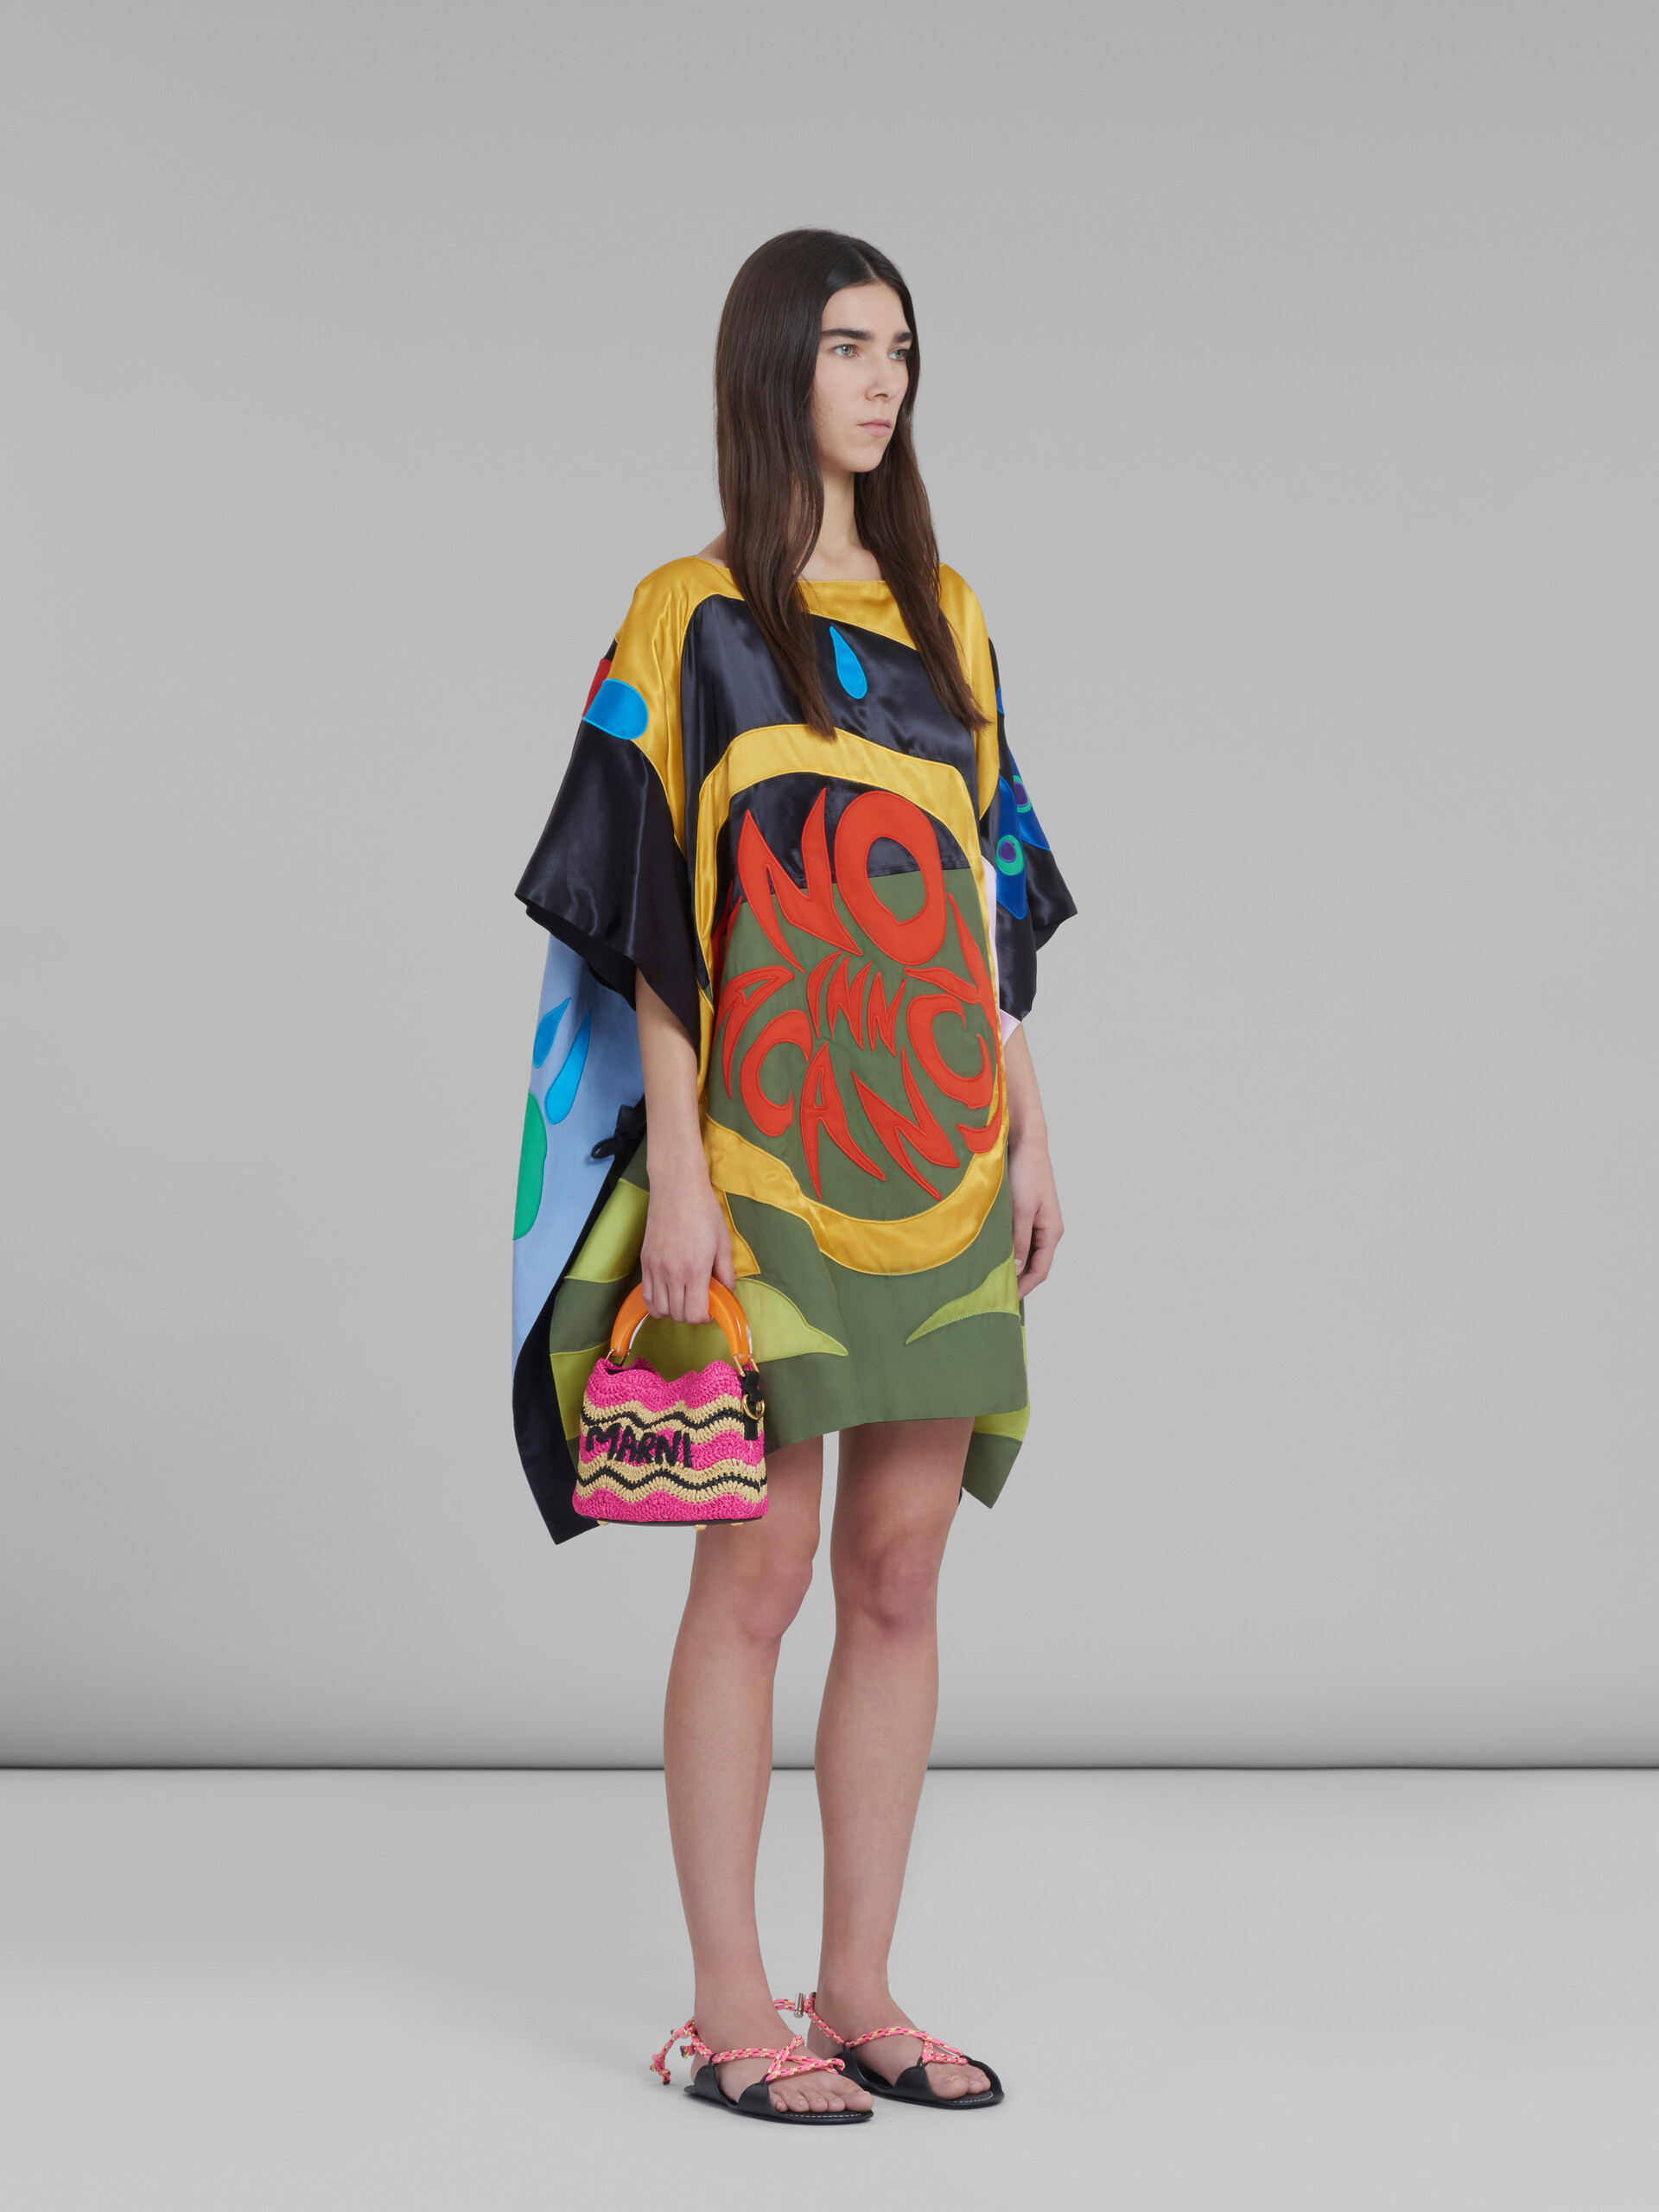 Marni x No Vacancy Inn - Cape top with multicolour patchwork motifs - Shirts - Image 6